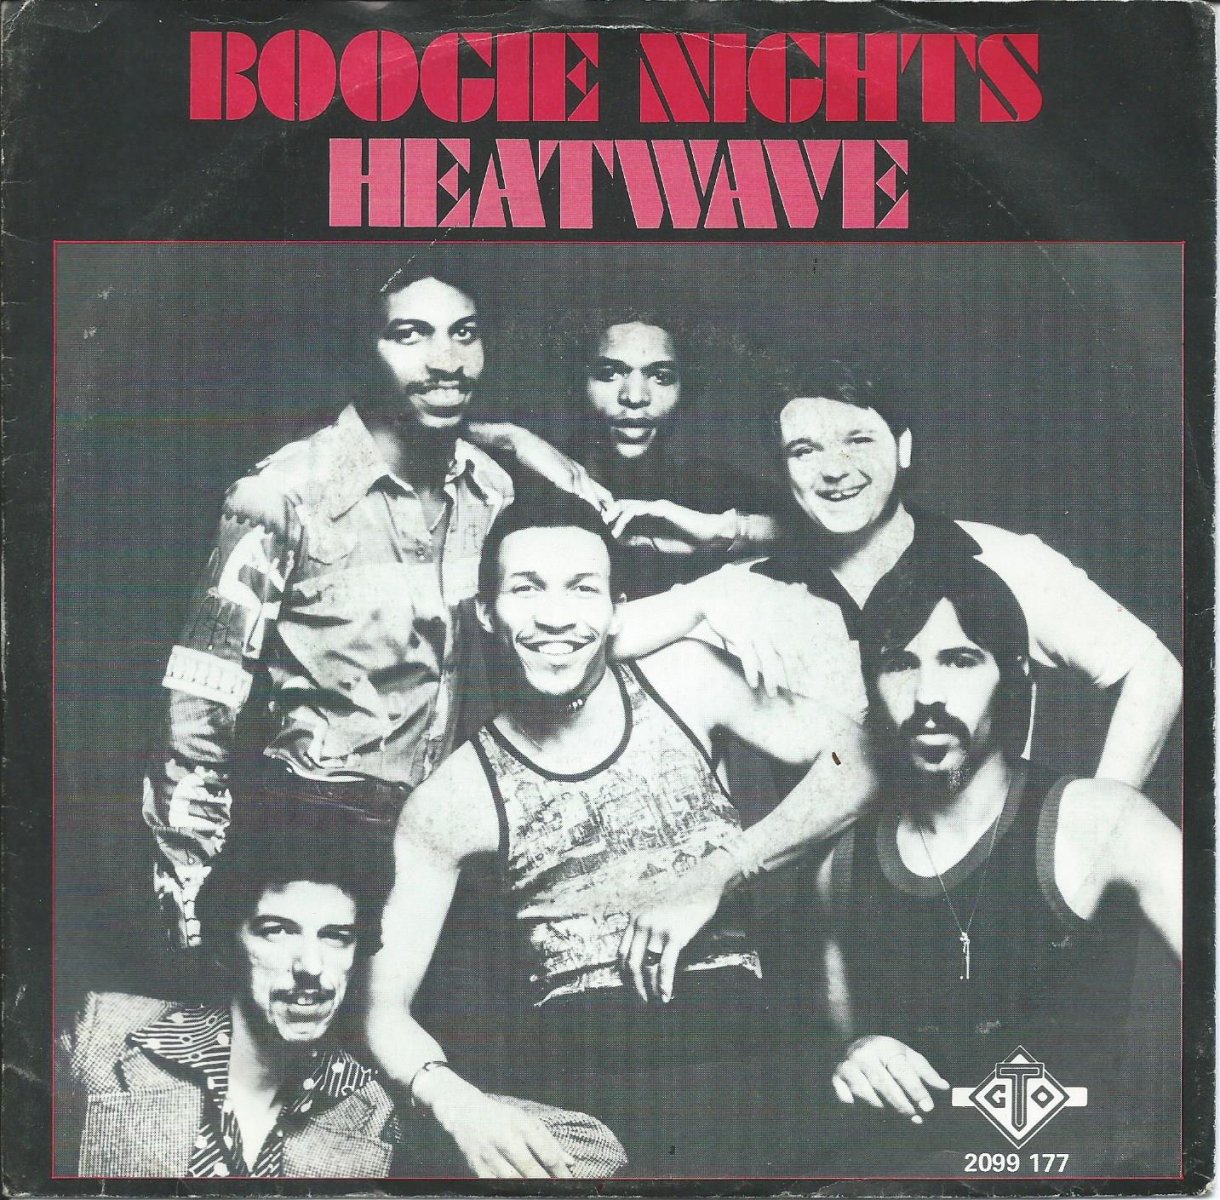 Heatwave Boogie Nights All You Do Is Dial 7 Hip Tank Records